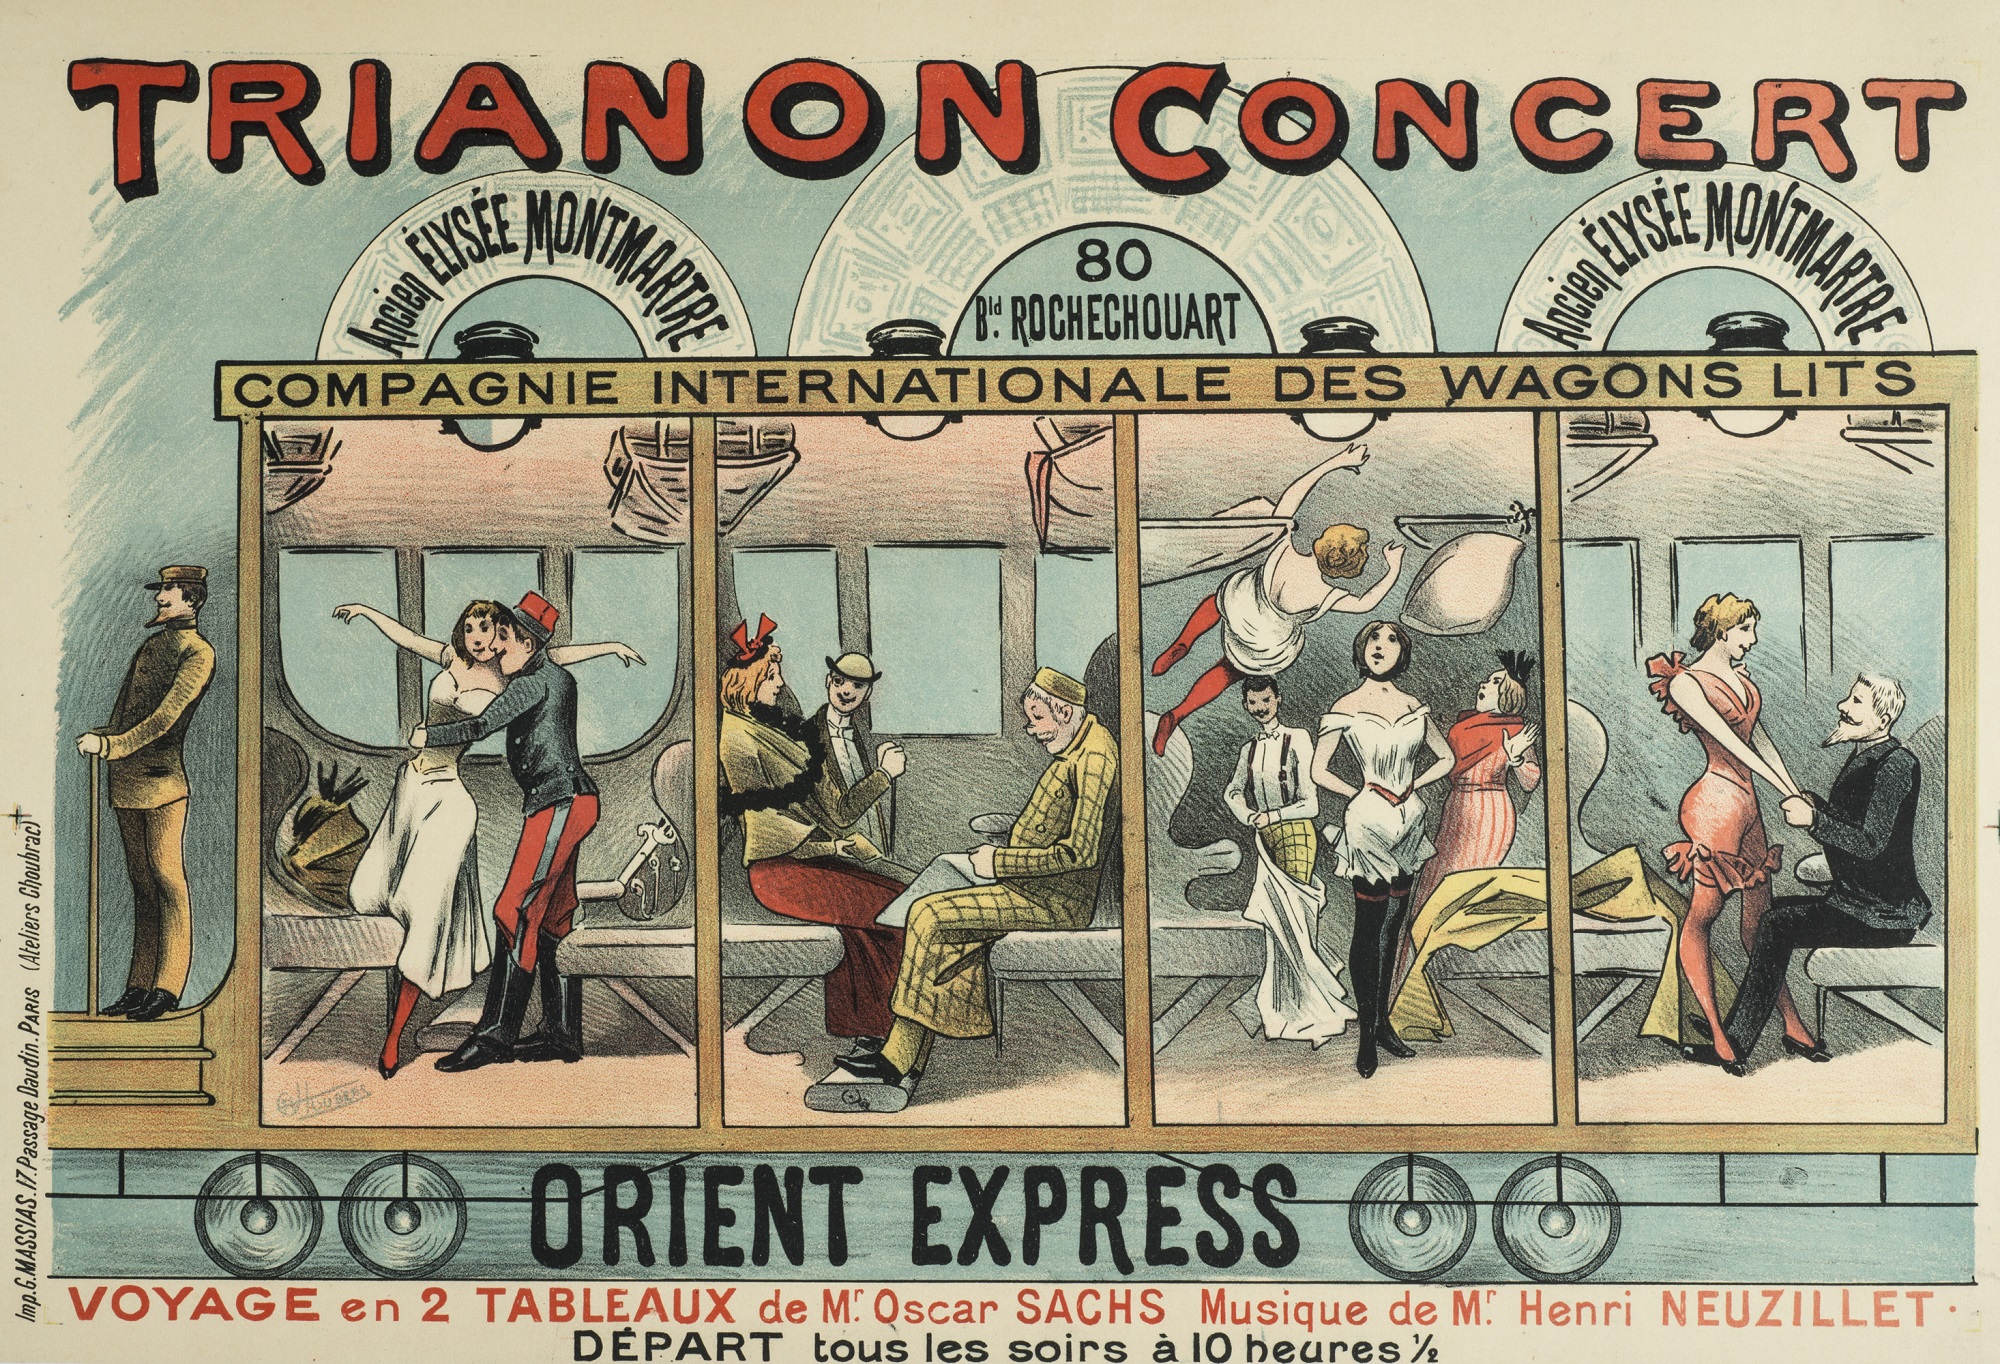 Advertisement for the Orient Express show